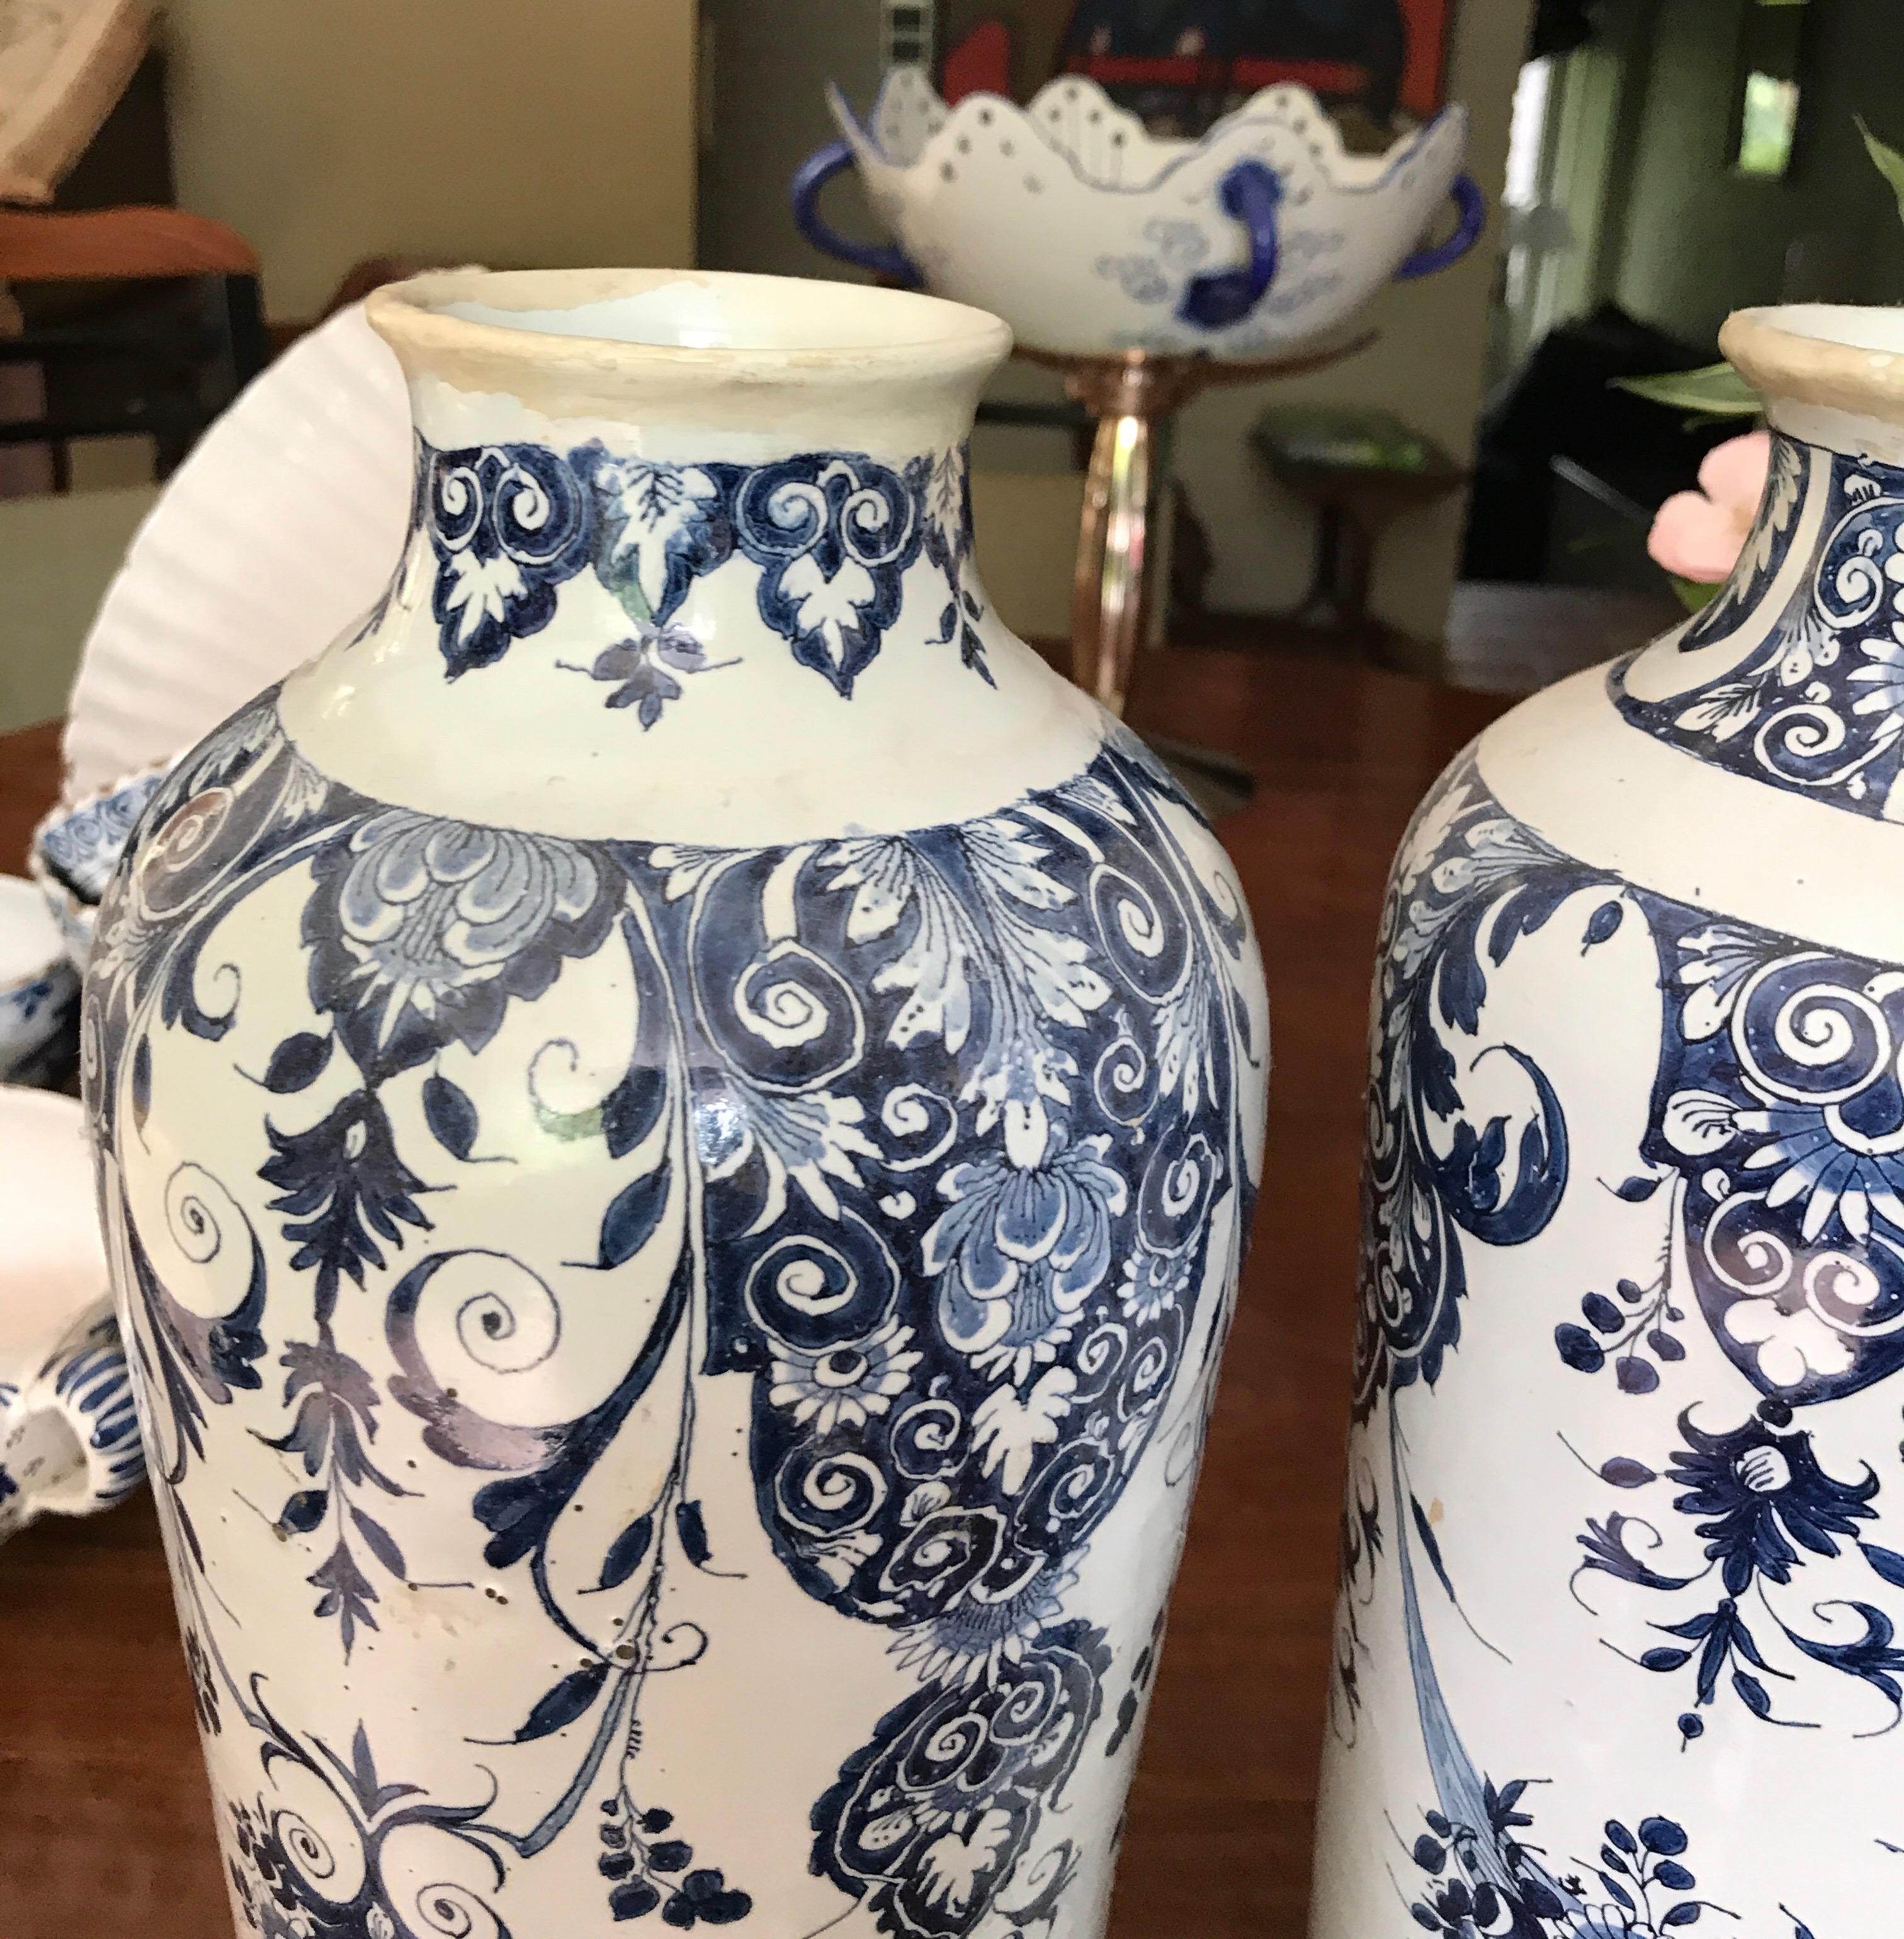 Two delft vases late 18th-early 19th century produced in the Dutch region off delft in the Netherlands
Minor old restorations on the top
No cracks
Marks on the bottom
Beautiful and many different flower patterns on both vases.
 